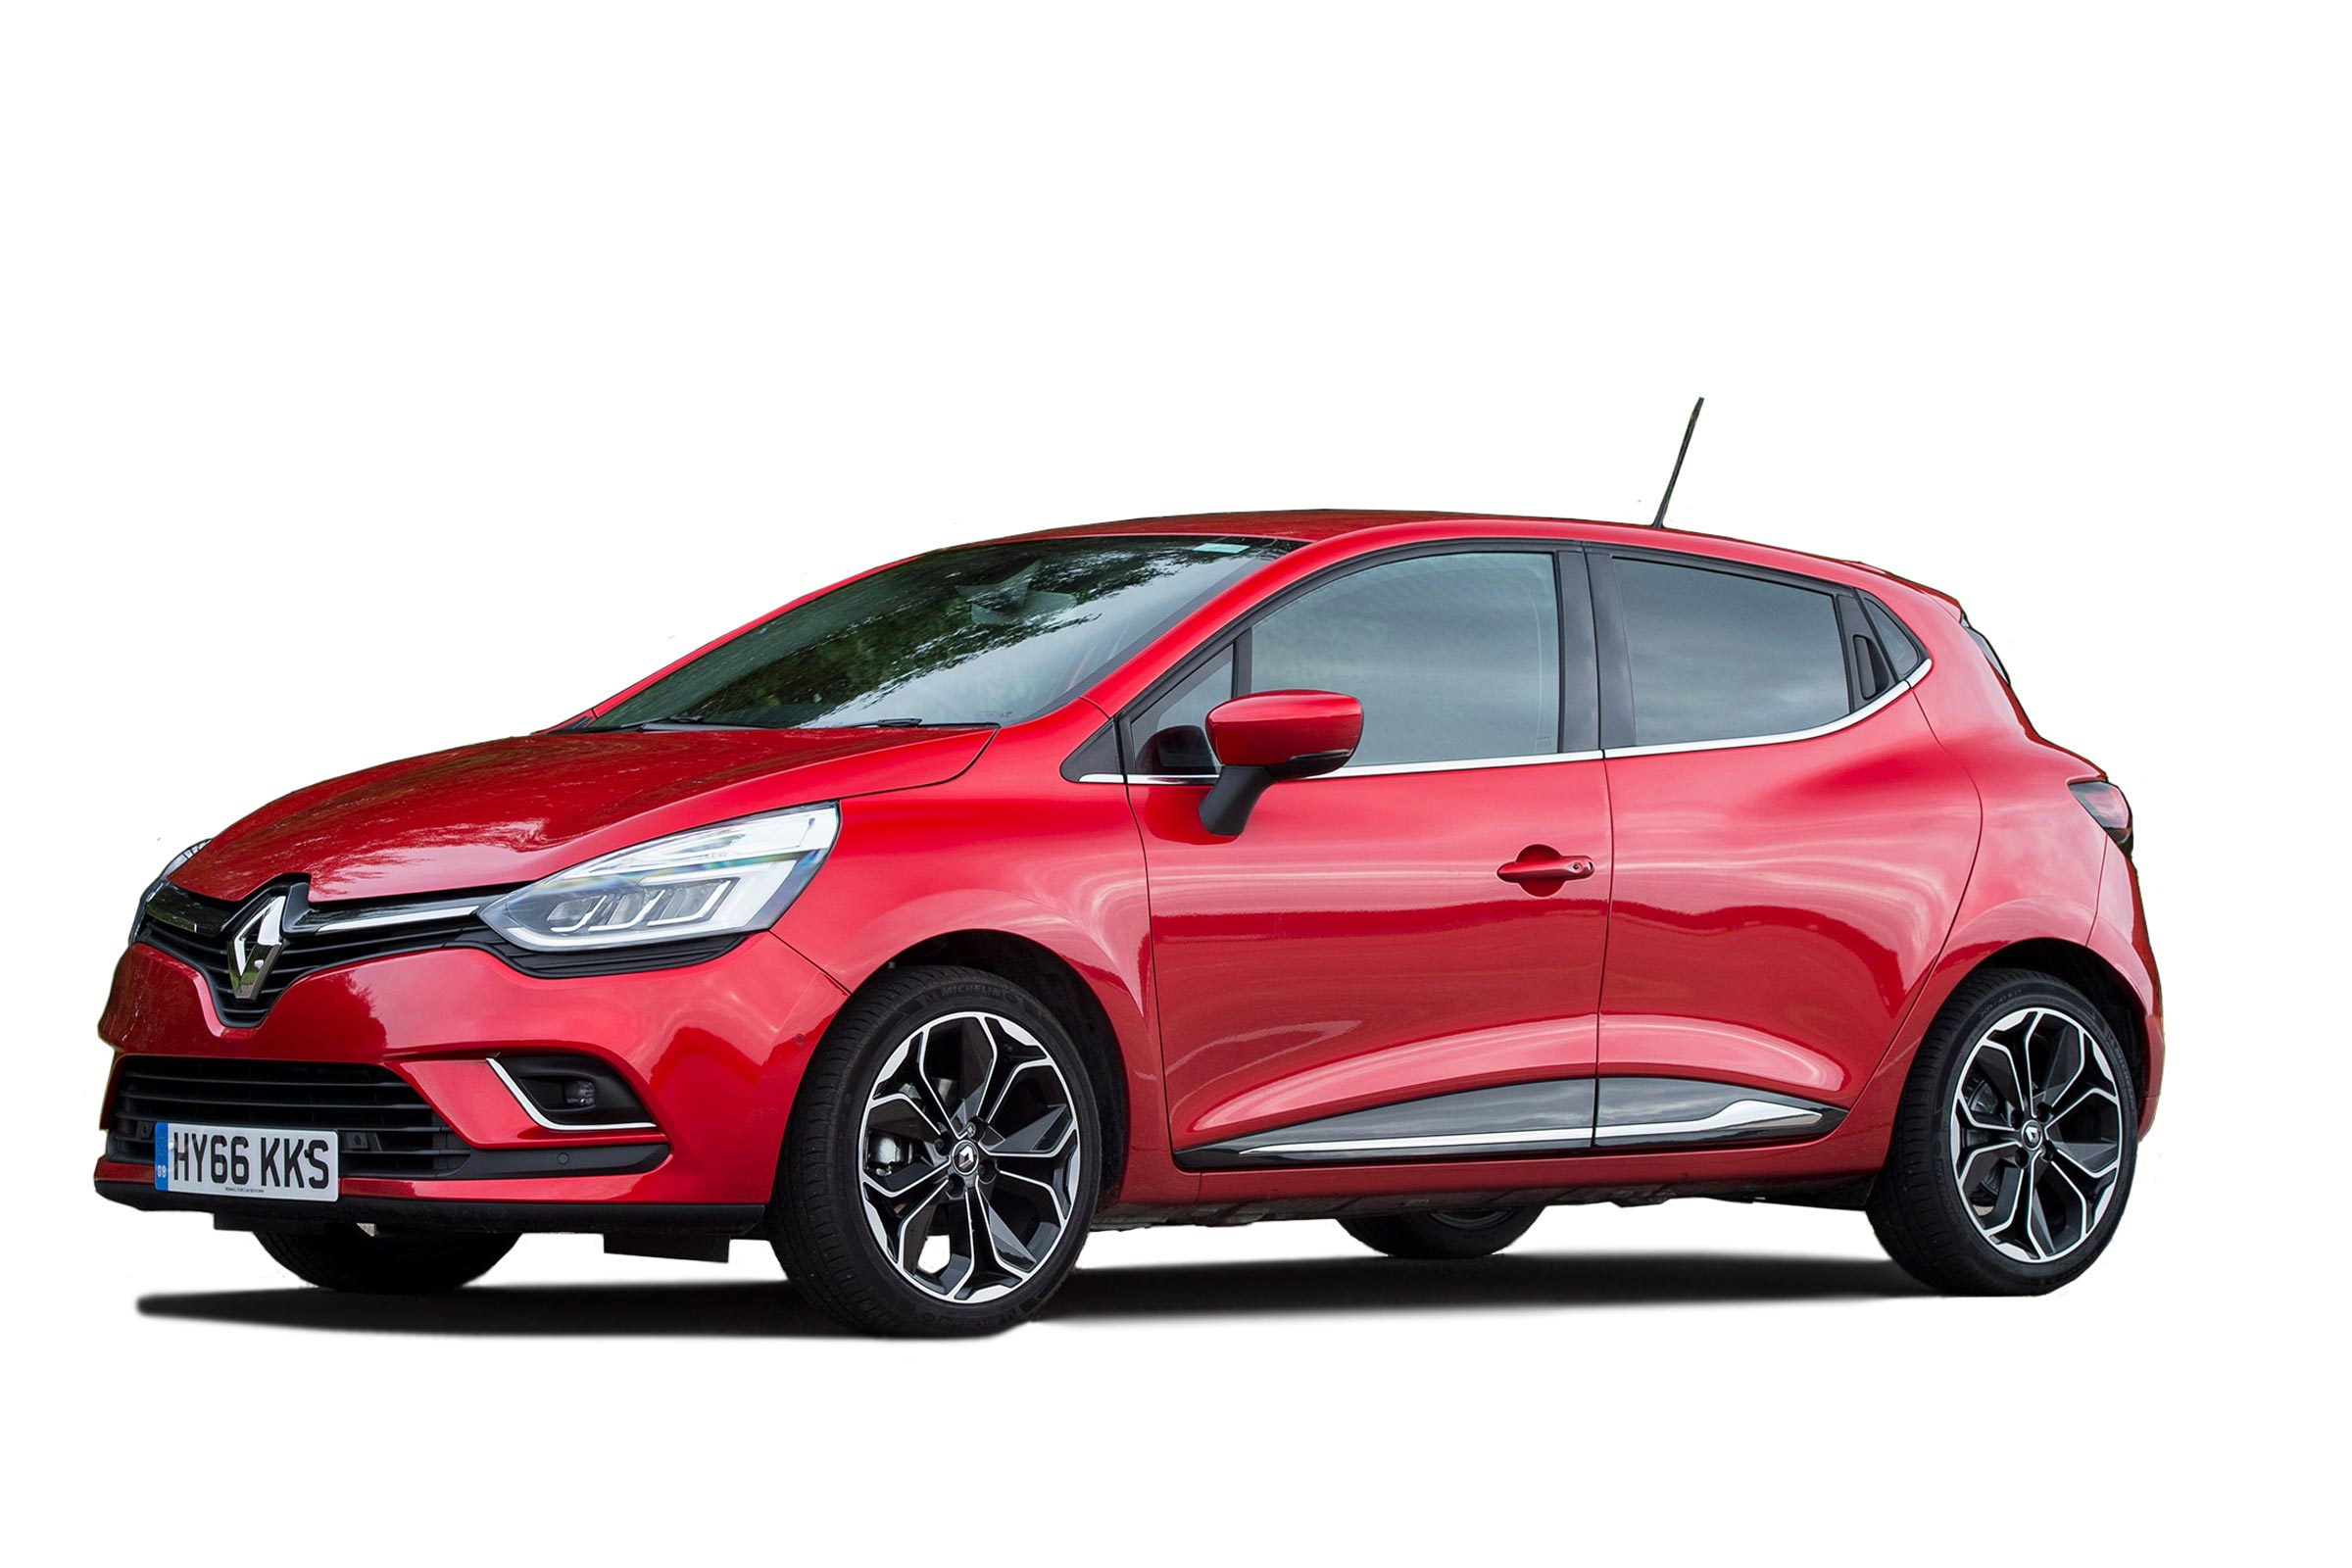 Renault Clio hatchback (2013-2019) - Reliability & safety